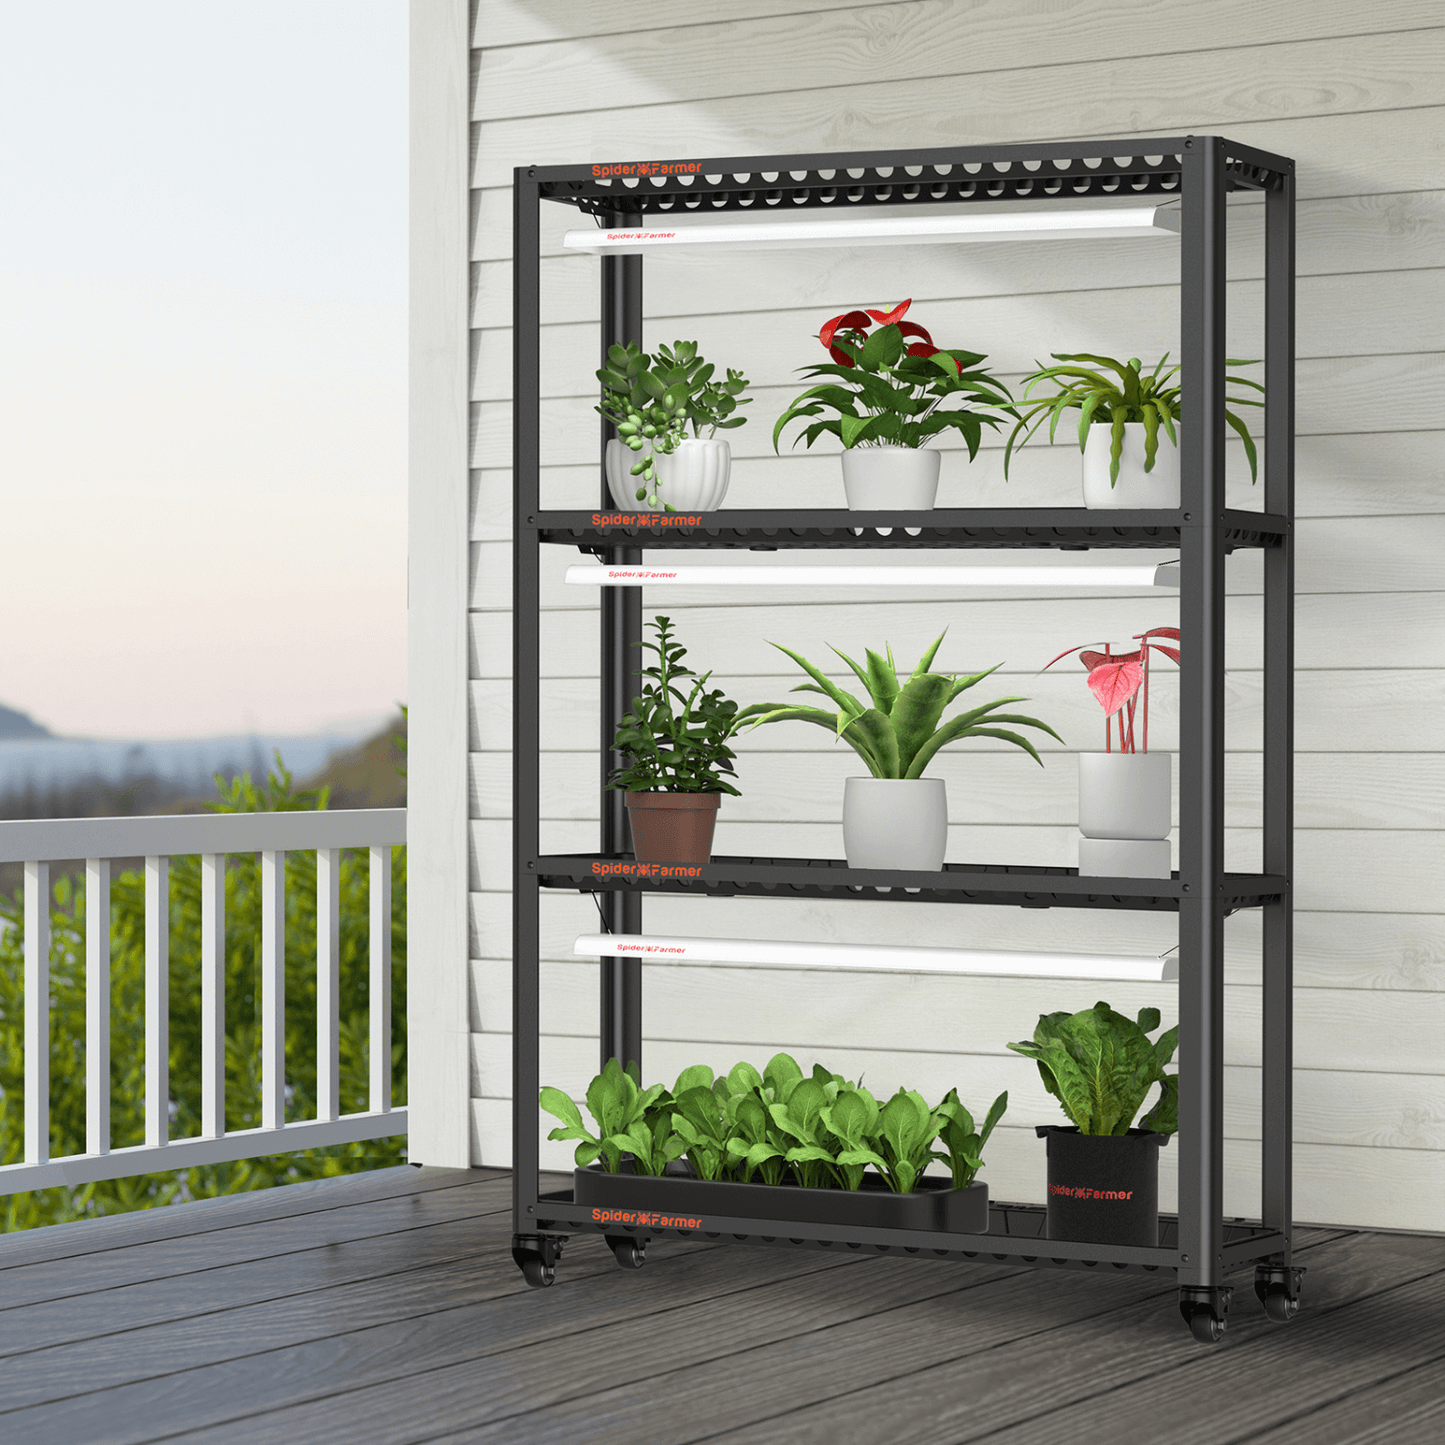 Spider Farmer 3 Tier Metal Plant Stand with Trays | SPIDER-SF-Shelfkit-C | Grow Tents Depot | Grow Tents | 6973280378210